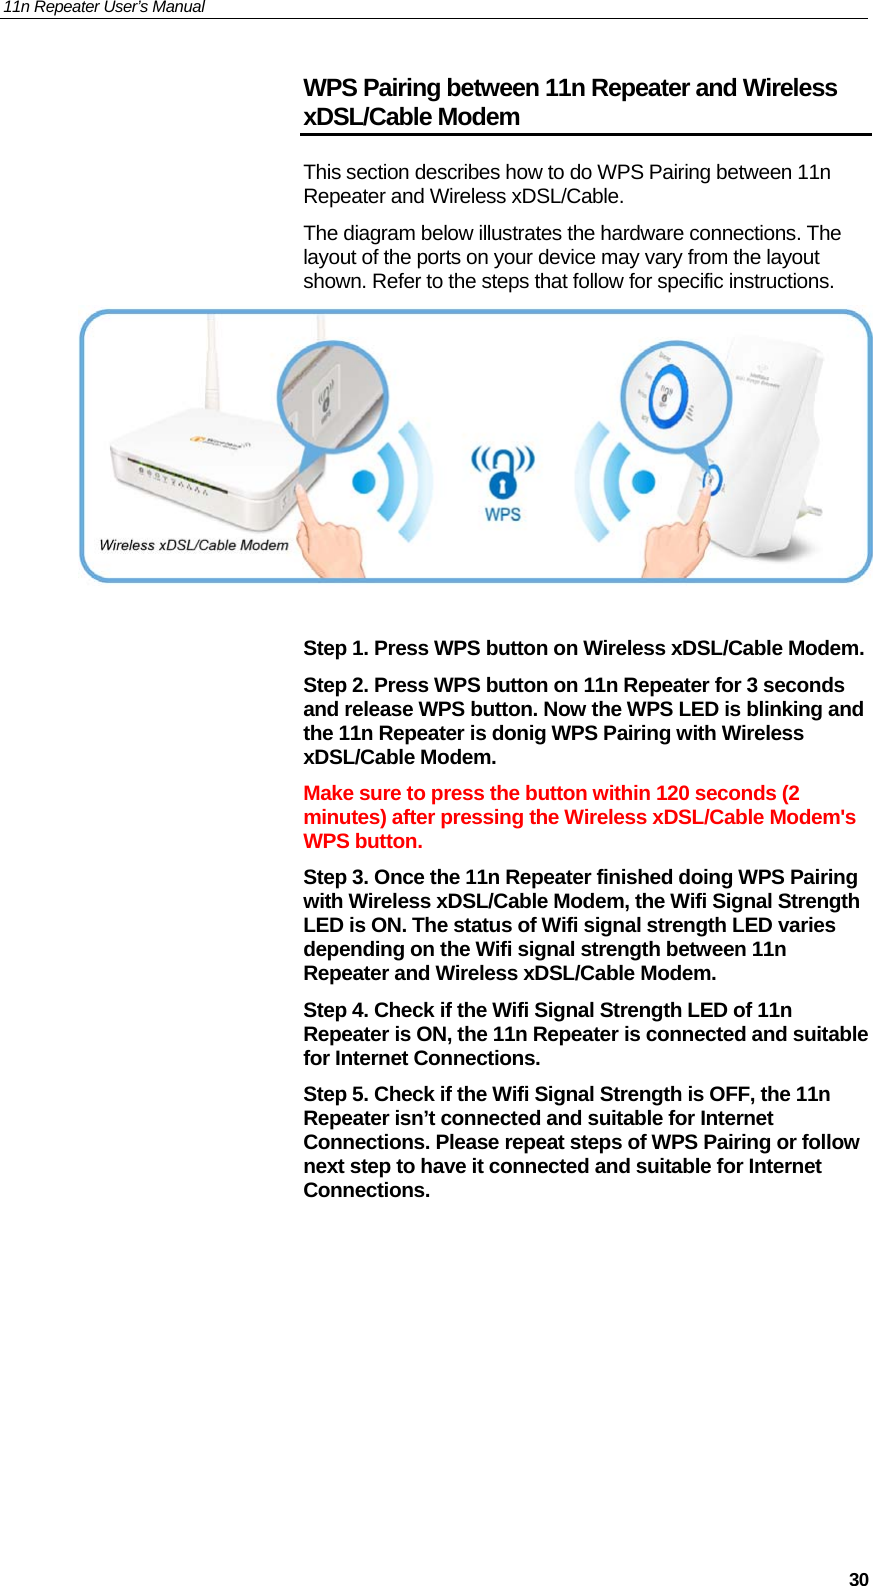 11n Repeater User’s Manual     30WPS Pairing between 11n Repeater and Wireless xDSL/Cable Modem This section describes how to do WPS Pairing between 11n Repeater and Wireless xDSL/Cable. The diagram below illustrates the hardware connections. The layout of the ports on your device may vary from the layout shown. Refer to the steps that follow for specific instructions.   Step 1. Press WPS button on Wireless xDSL/Cable Modem. Step 2. Press WPS button on 11n Repeater for 3 seconds and release WPS button. Now the WPS LED is blinking and the 11n Repeater is donig WPS Pairing with Wireless xDSL/Cable Modem. Make sure to press the button within 120 seconds (2 minutes) after pressing the Wireless xDSL/Cable Modem&apos;s WPS button. Step 3. Once the 11n Repeater finished doing WPS Pairing with Wireless xDSL/Cable Modem, the Wifi Signal Strength LED is ON. The status of Wifi signal strength LED varies depending on the Wifi signal strength between 11n Repeater and Wireless xDSL/Cable Modem. Step 4. Check if the Wifi Signal Strength LED of 11n Repeater is ON, the 11n Repeater is connected and suitable for Internet Connections. Step 5. Check if the Wifi Signal Strength is OFF, the 11n Repeater isn’t connected and suitable for Internet Connections. Please repeat steps of WPS Pairing or follow next step to have it connected and suitable for Internet Connections.    